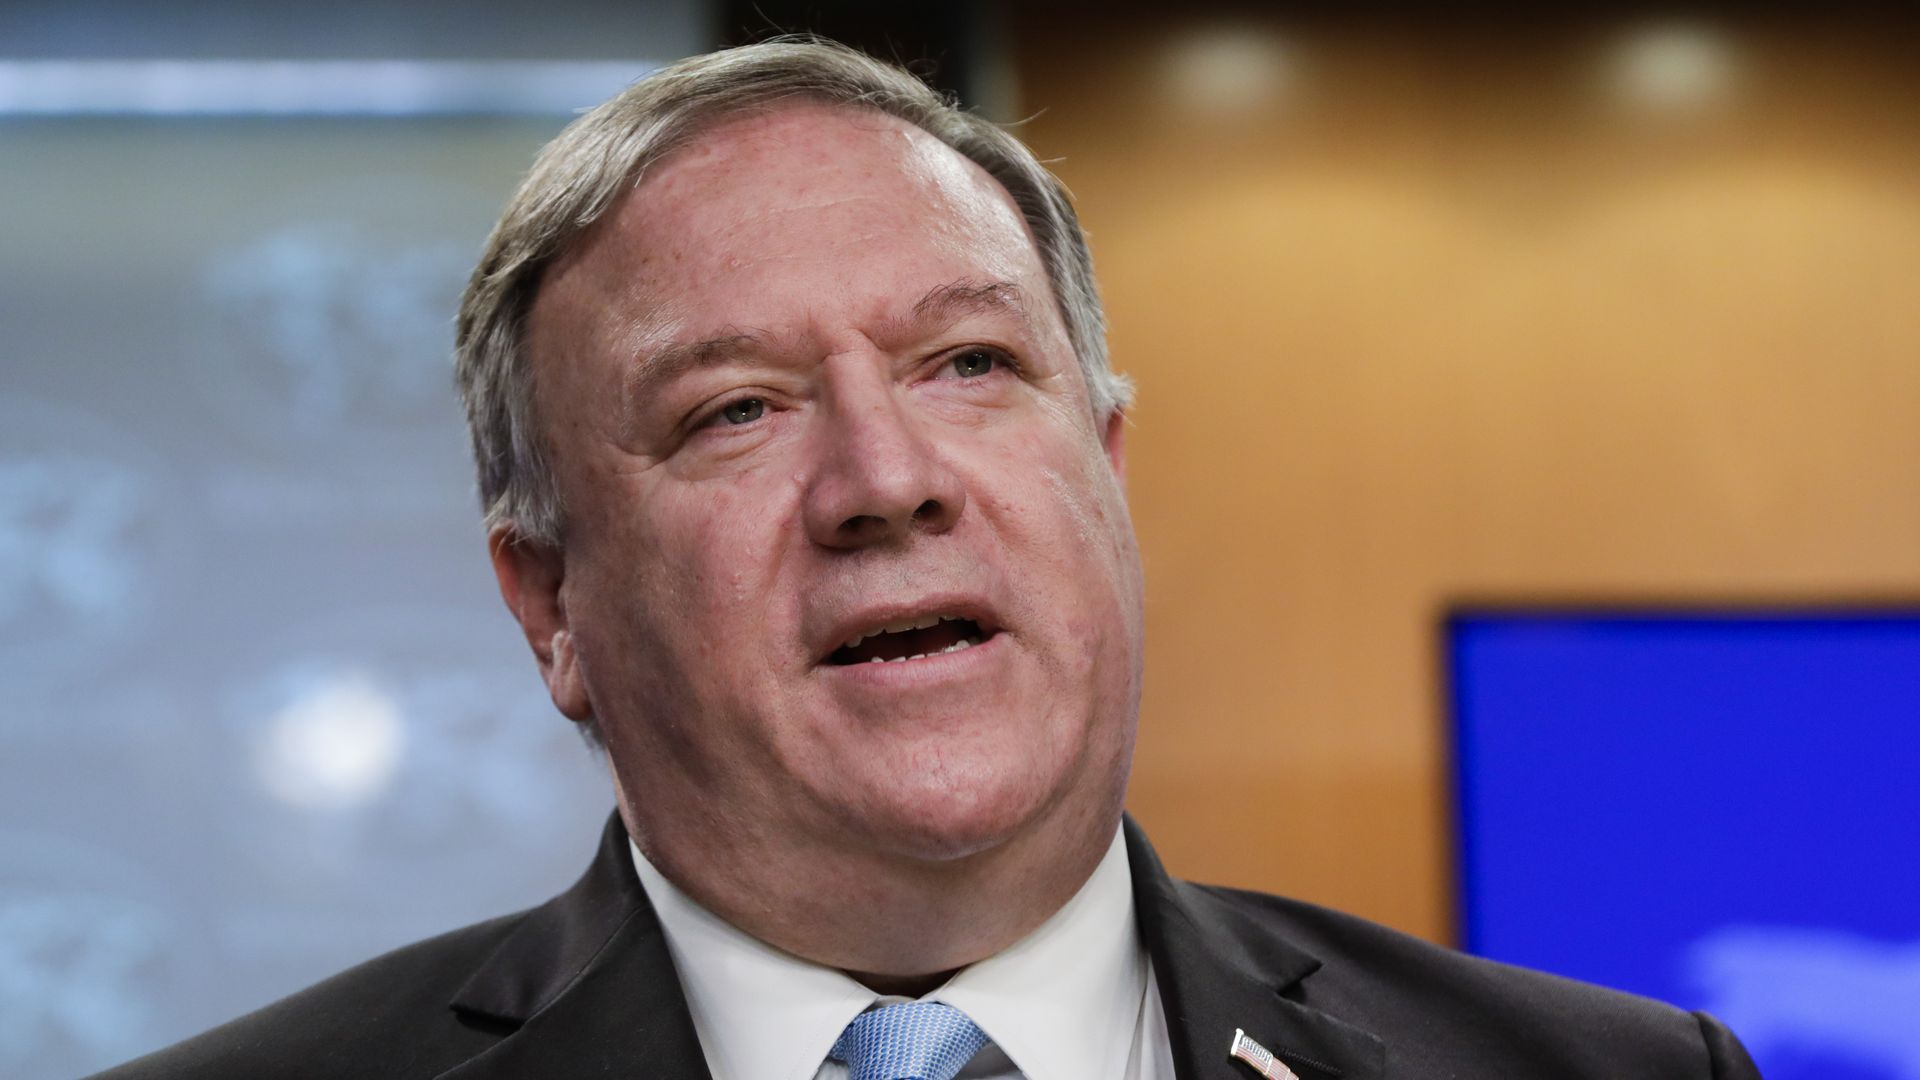 Pompeo in a suit and tie